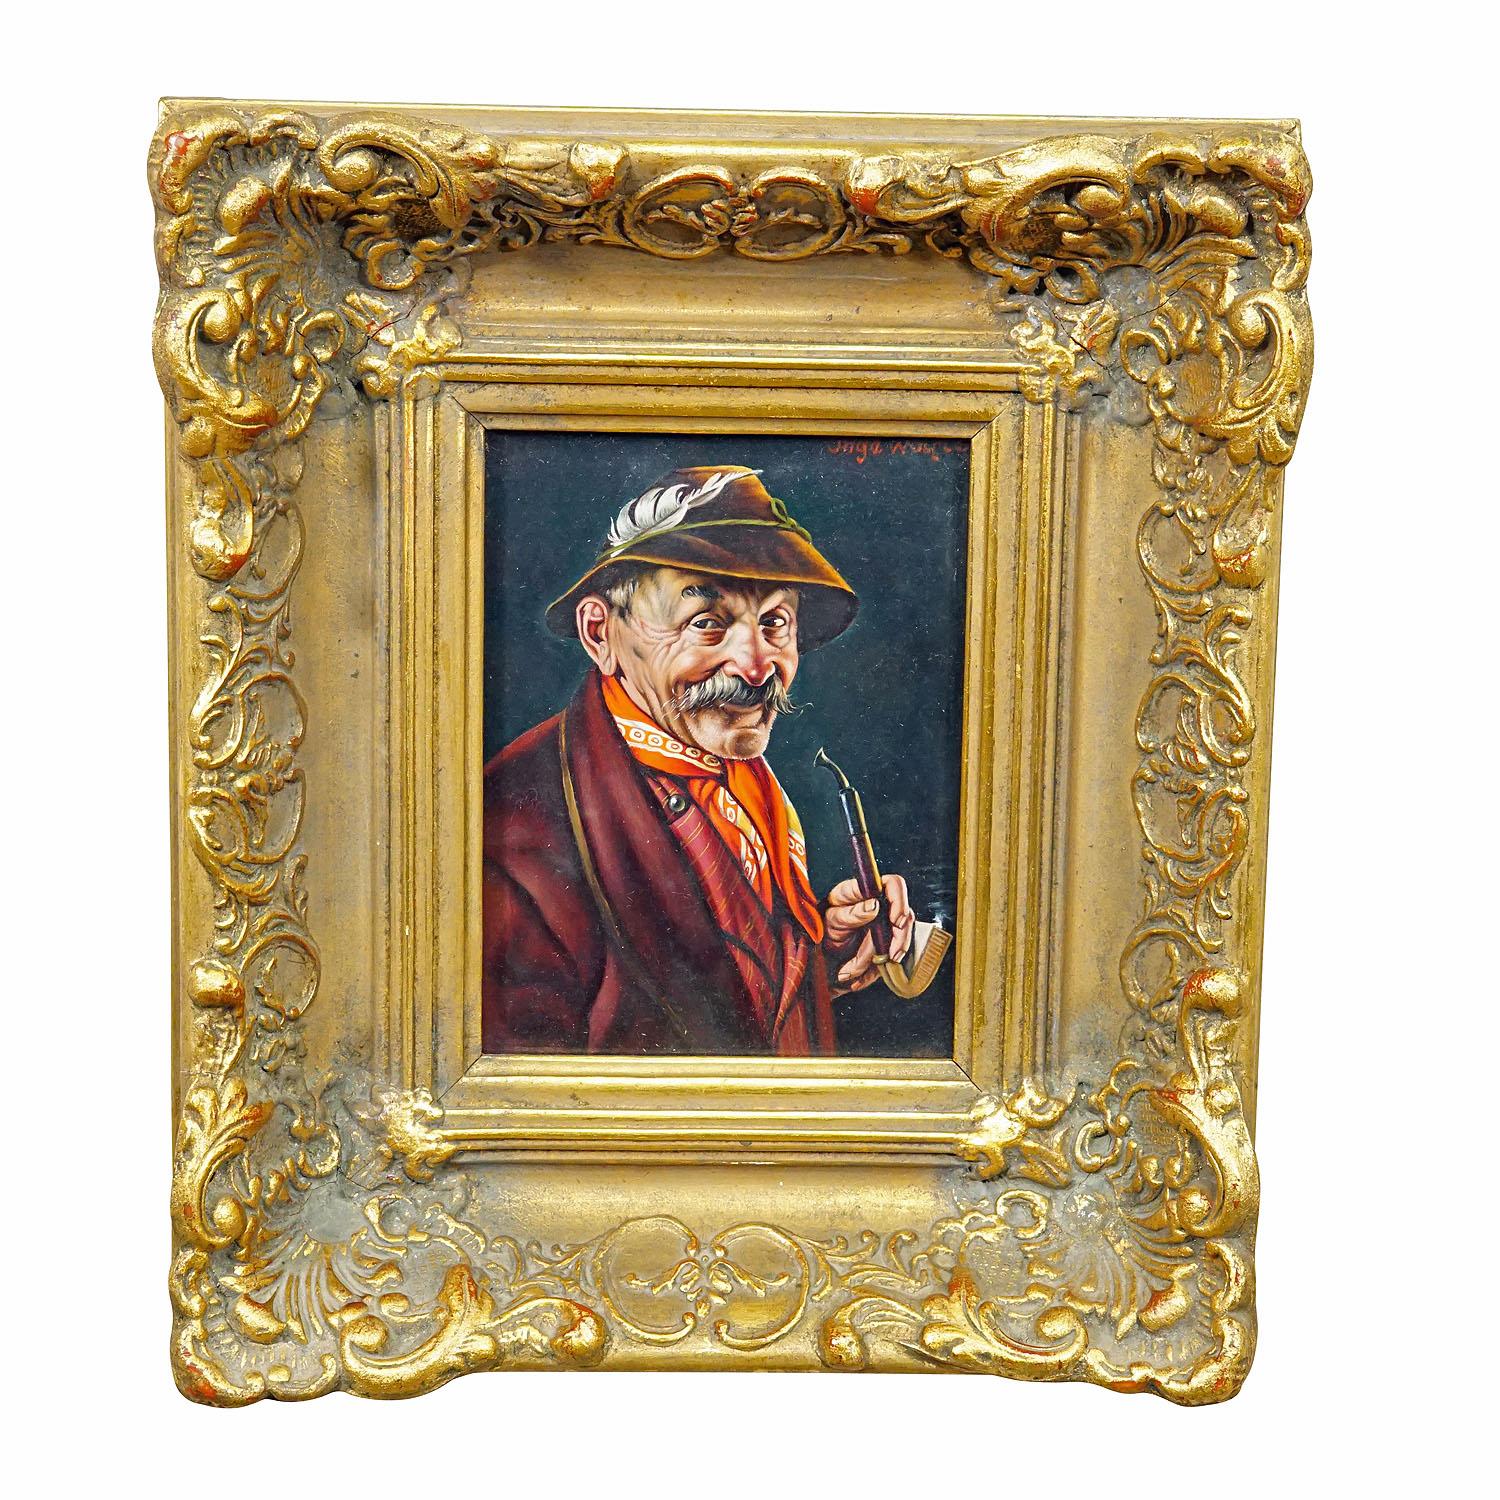 Inge Woelfle - Portrait of a Bavarian Folksy Man with Pipe, Oil on Wood

An colorful oil painting depicting a pipe smoking folksy Bavarian man in his sunday robe. Painted on wood with pastel colors around 1950s. Framed with wooden carved and gilded